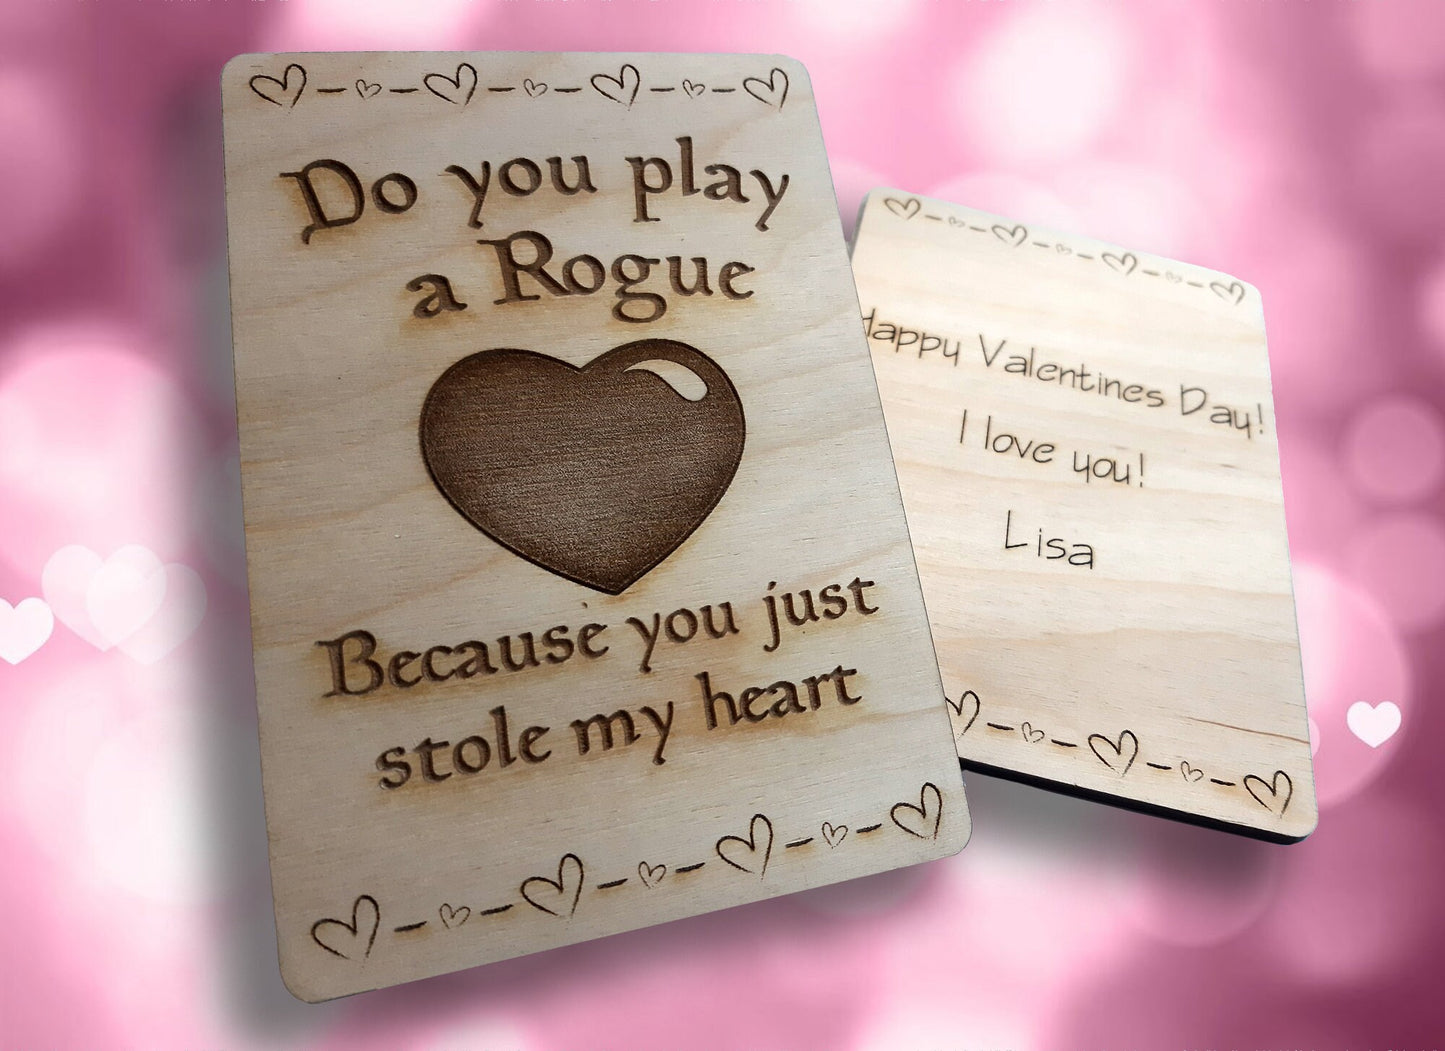 Valentine/Anniversary Card - Rogue You Stole My Heart RPG Gaming Clever VDay card, engraved wood, gamer gift, rpg, role-playing games d&d